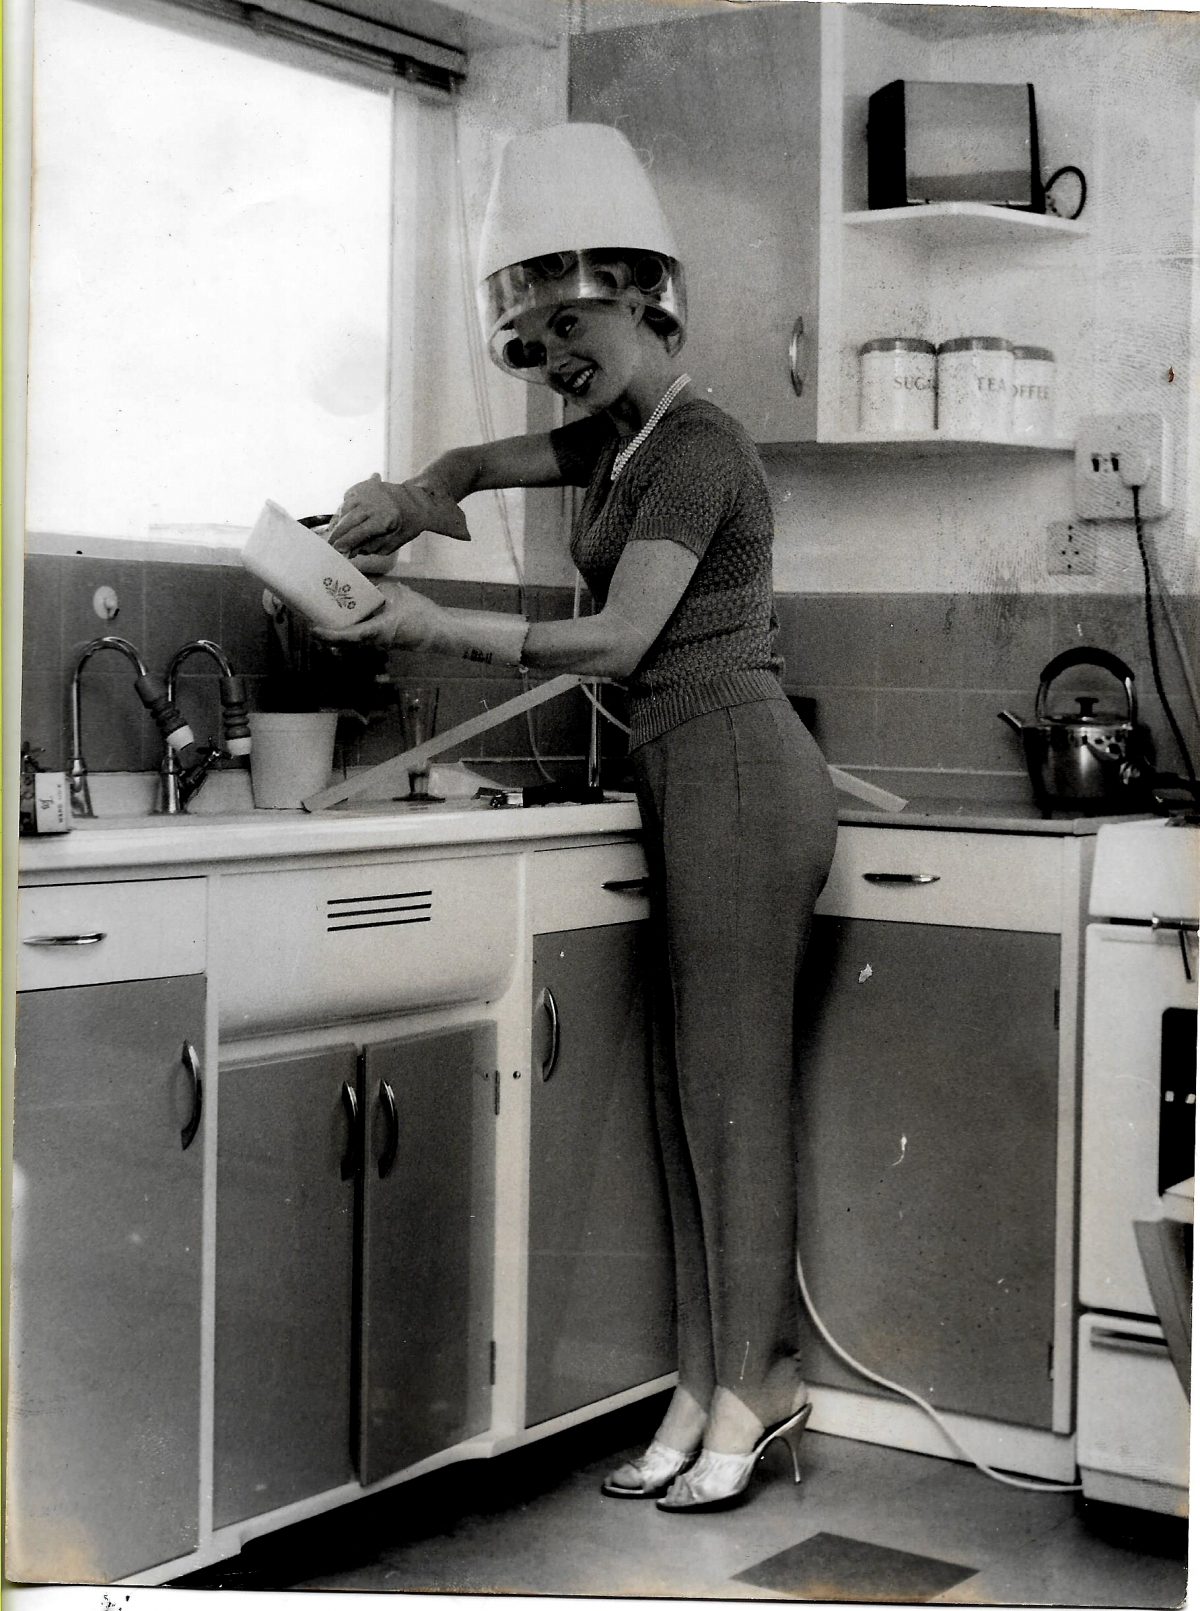 The image is showing Barbara Roscoe doing her hair and cooking.